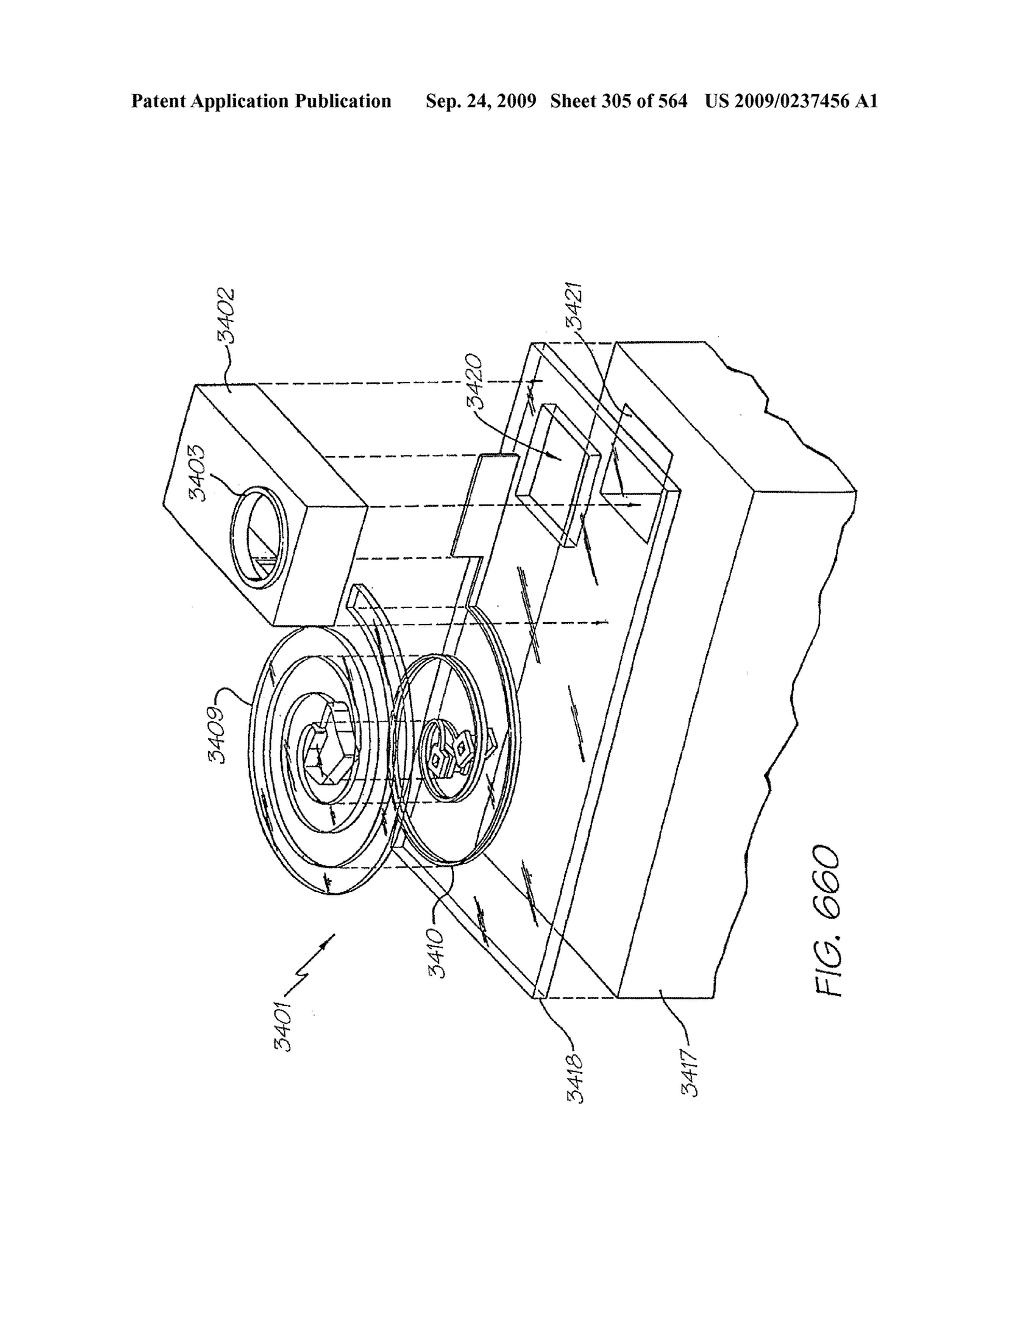 Inkjet Printhead With Paddle For Ejecting Ink From One Of Two Nozzles - diagram, schematic, and image 306